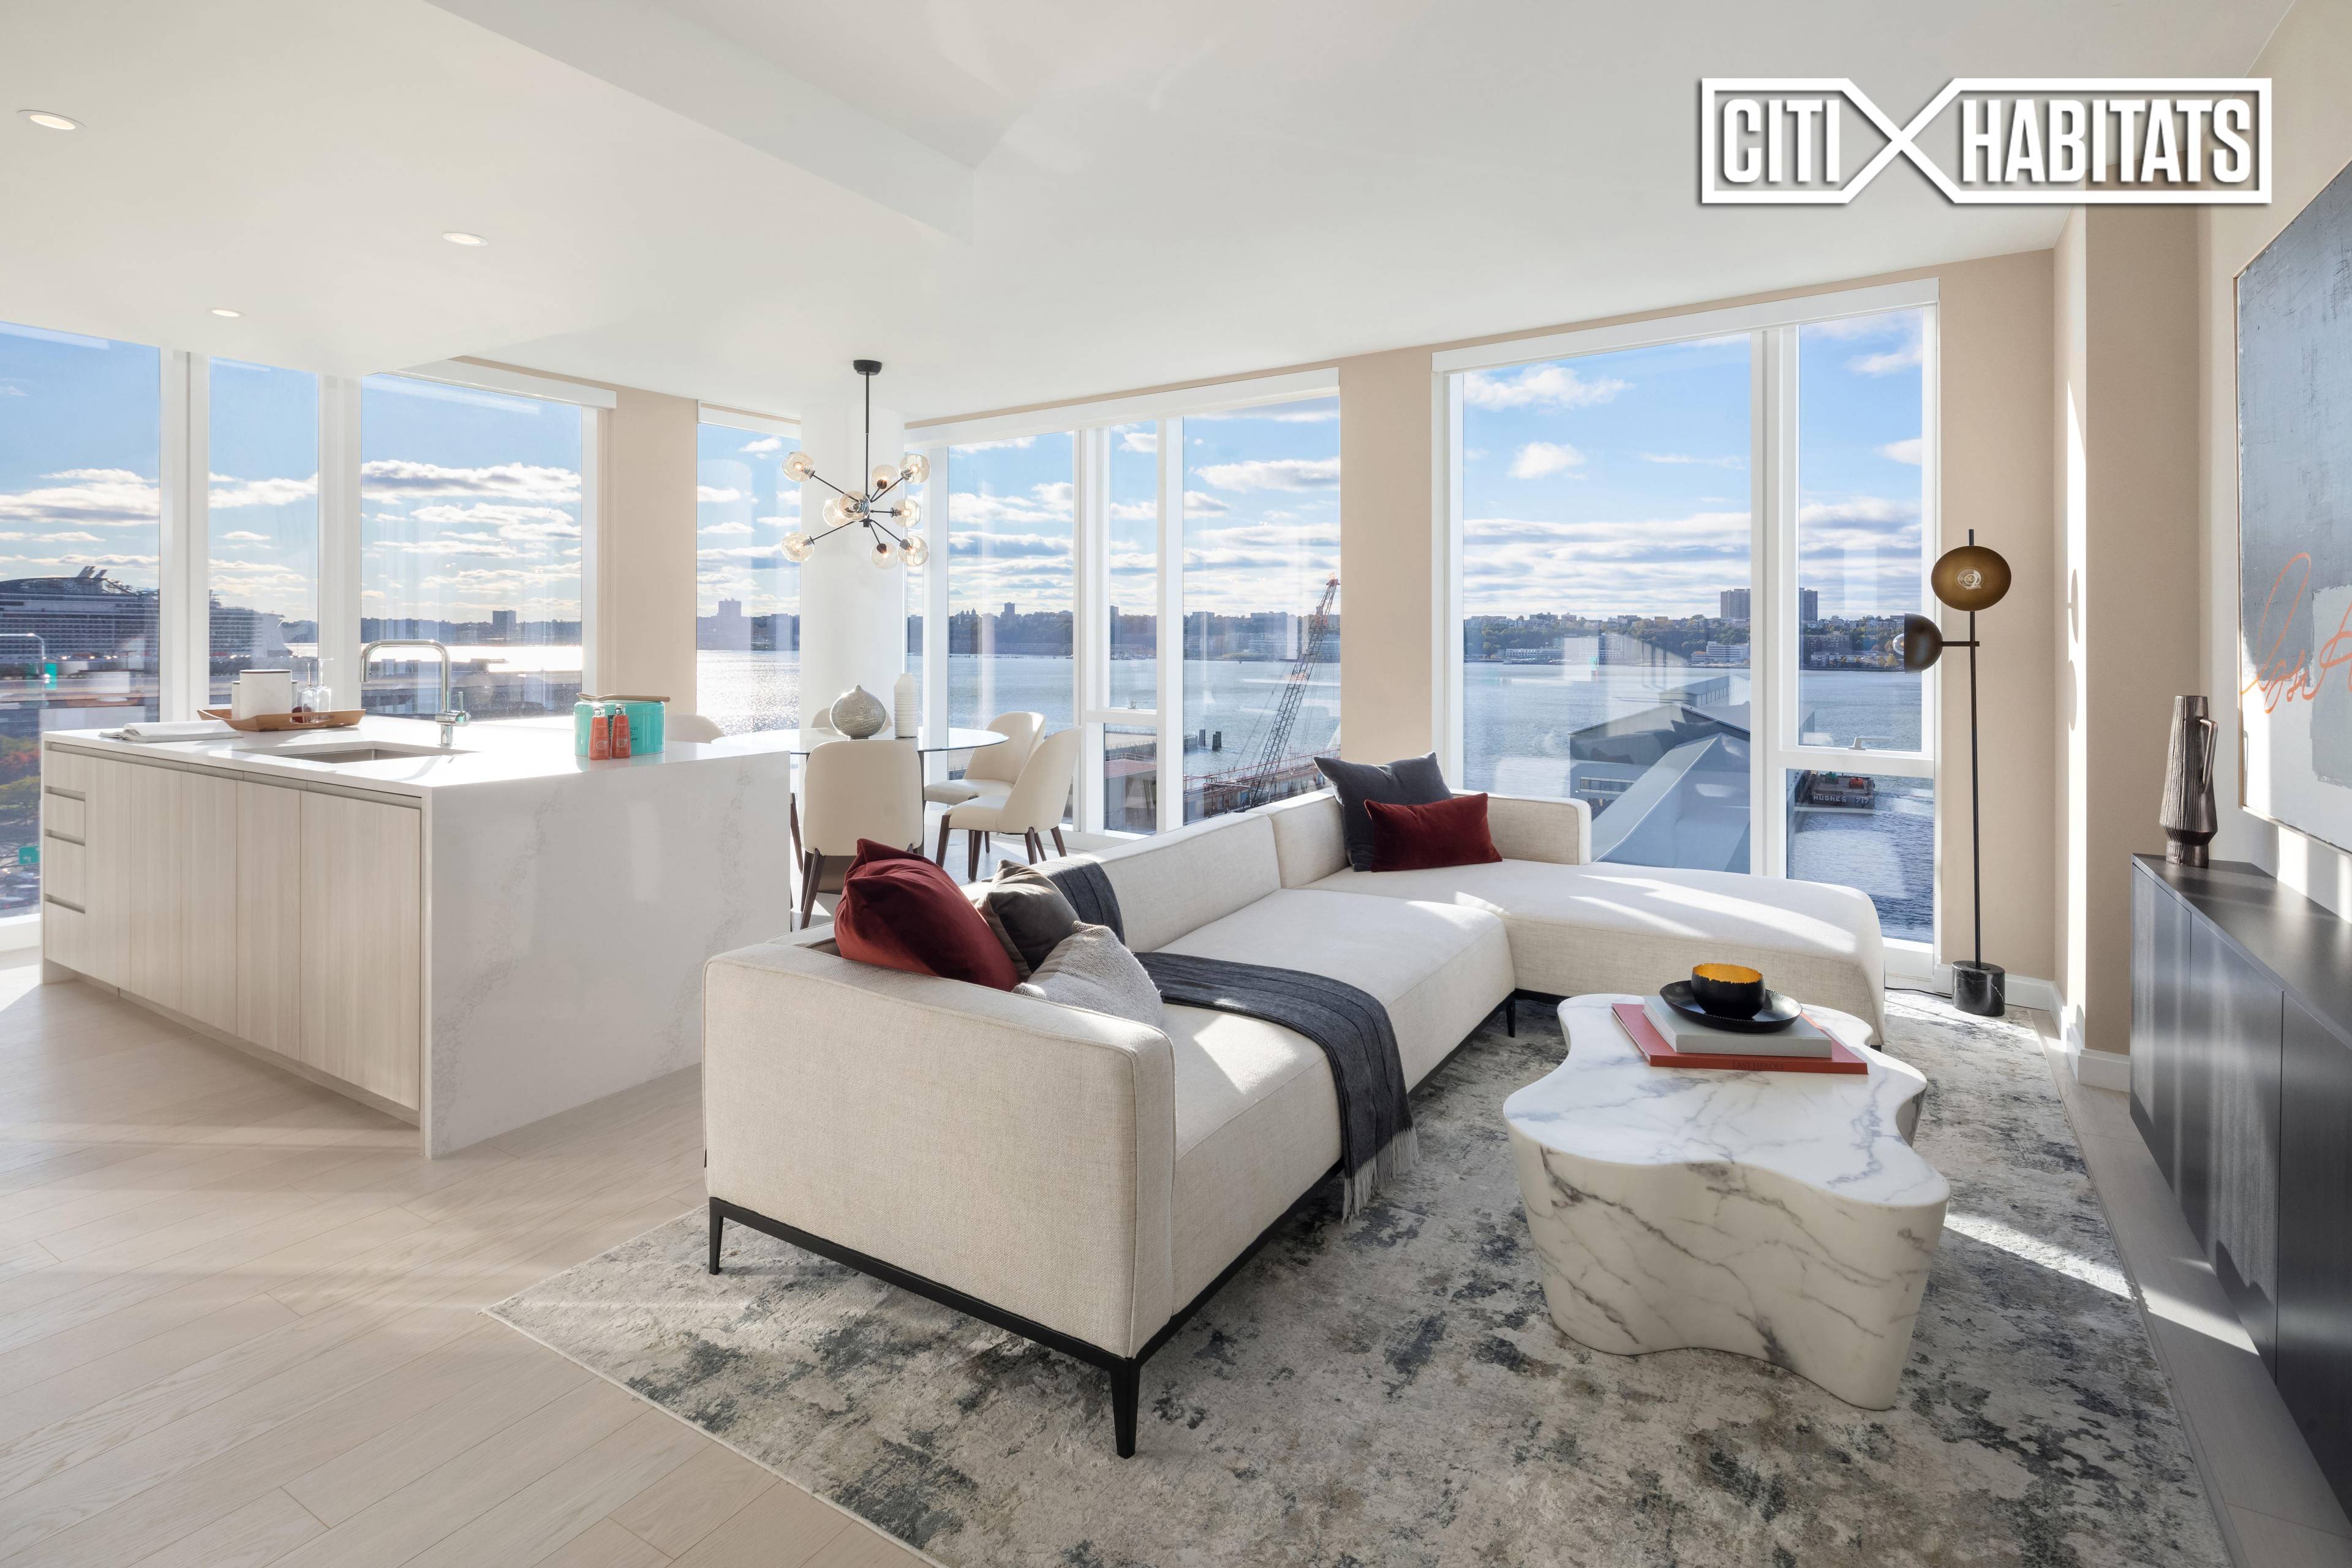 Waterline Square Luxury Rentals offer an unparalleled high quality, timeless design with spacious, light filled layouts and breathtaking views.